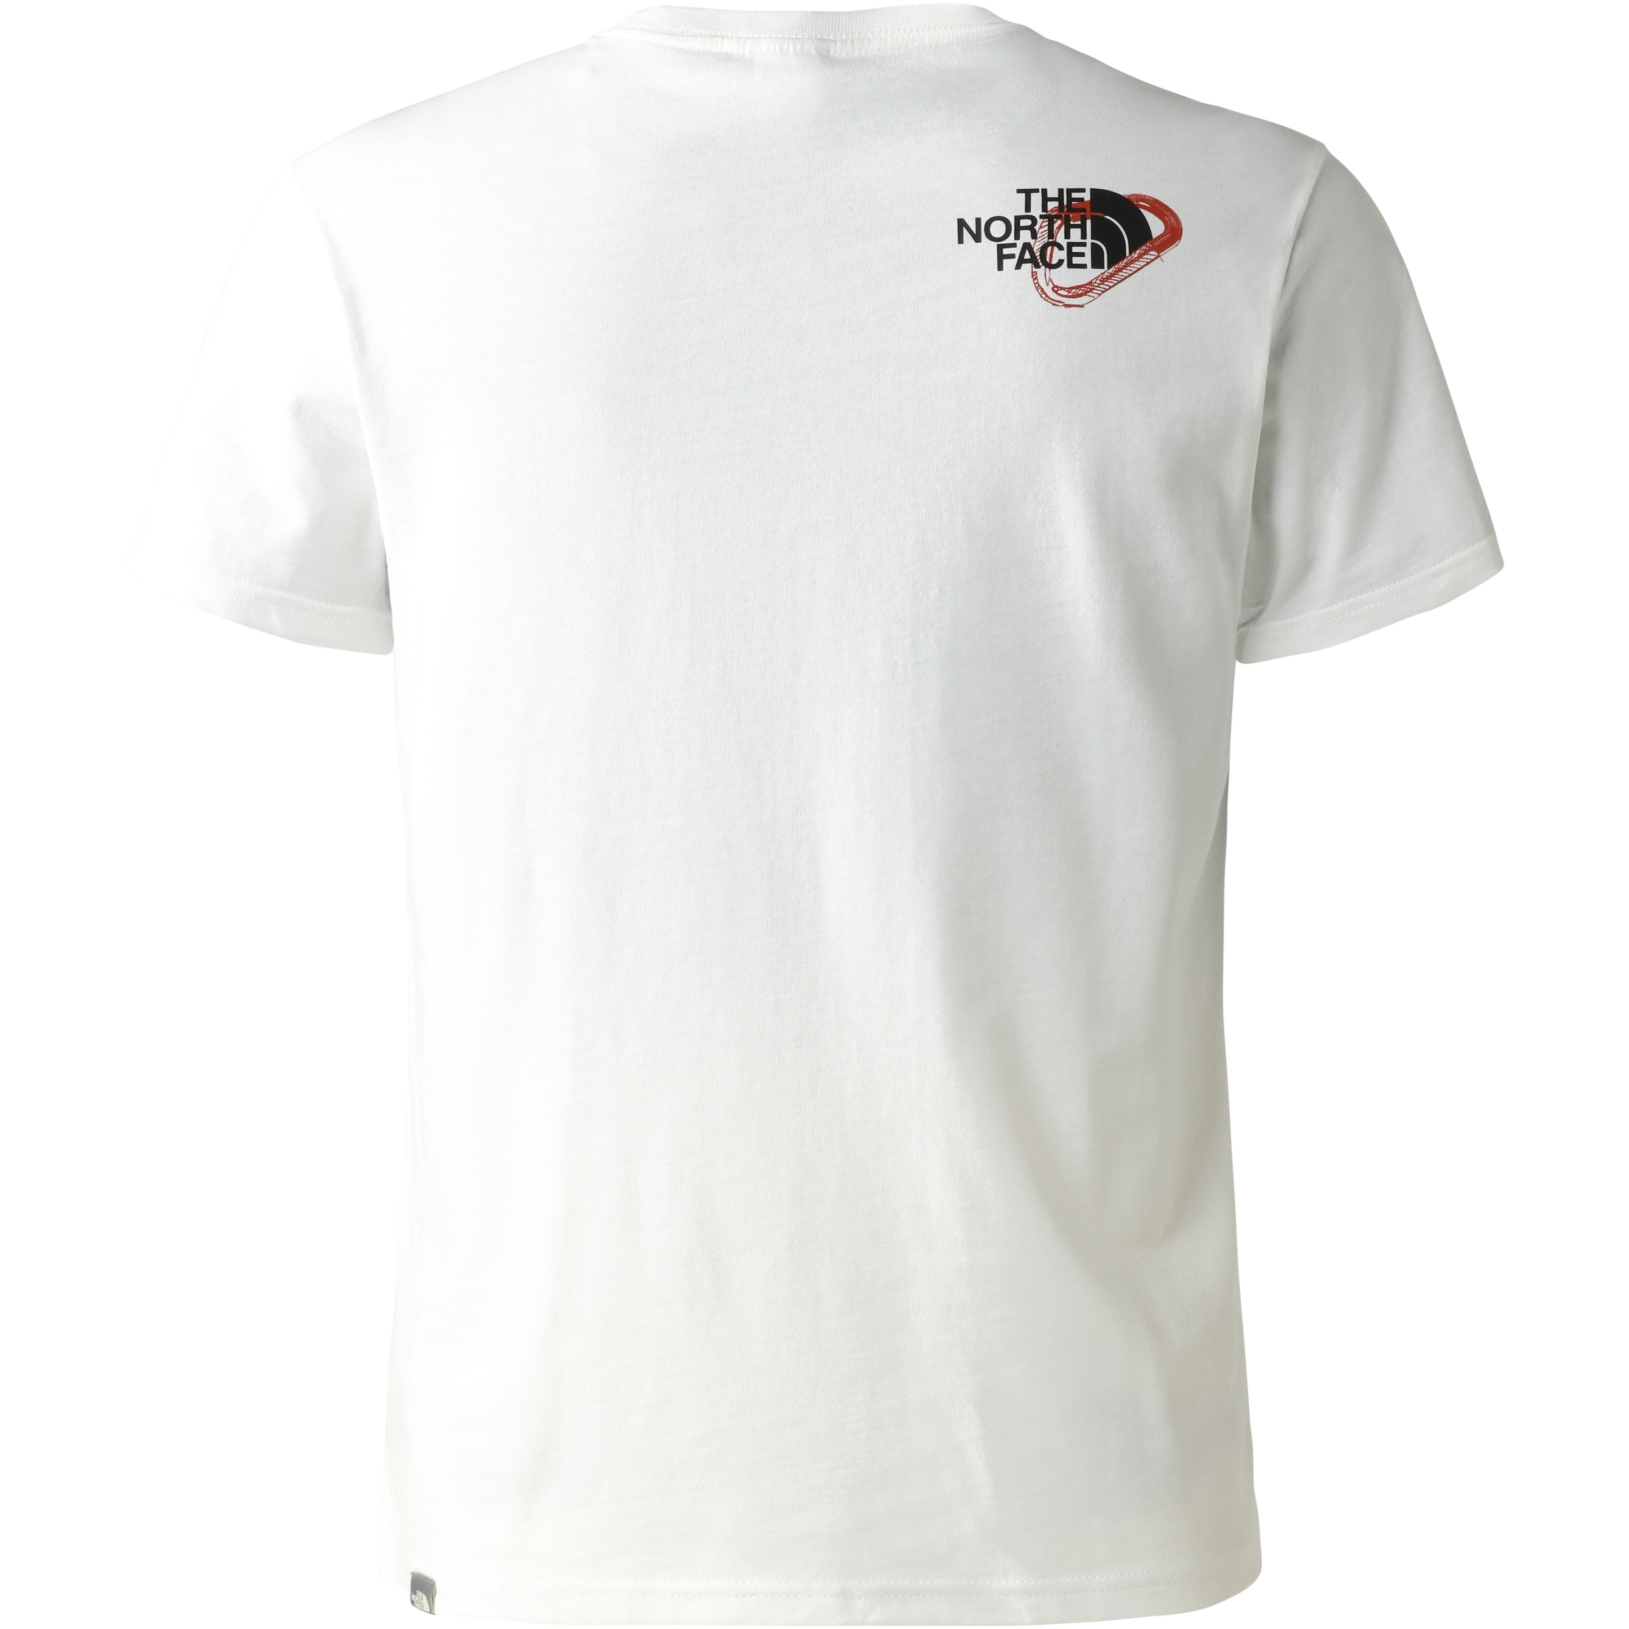 The North Face Outdoor Graphic T-Shirt Men - Gardenia White